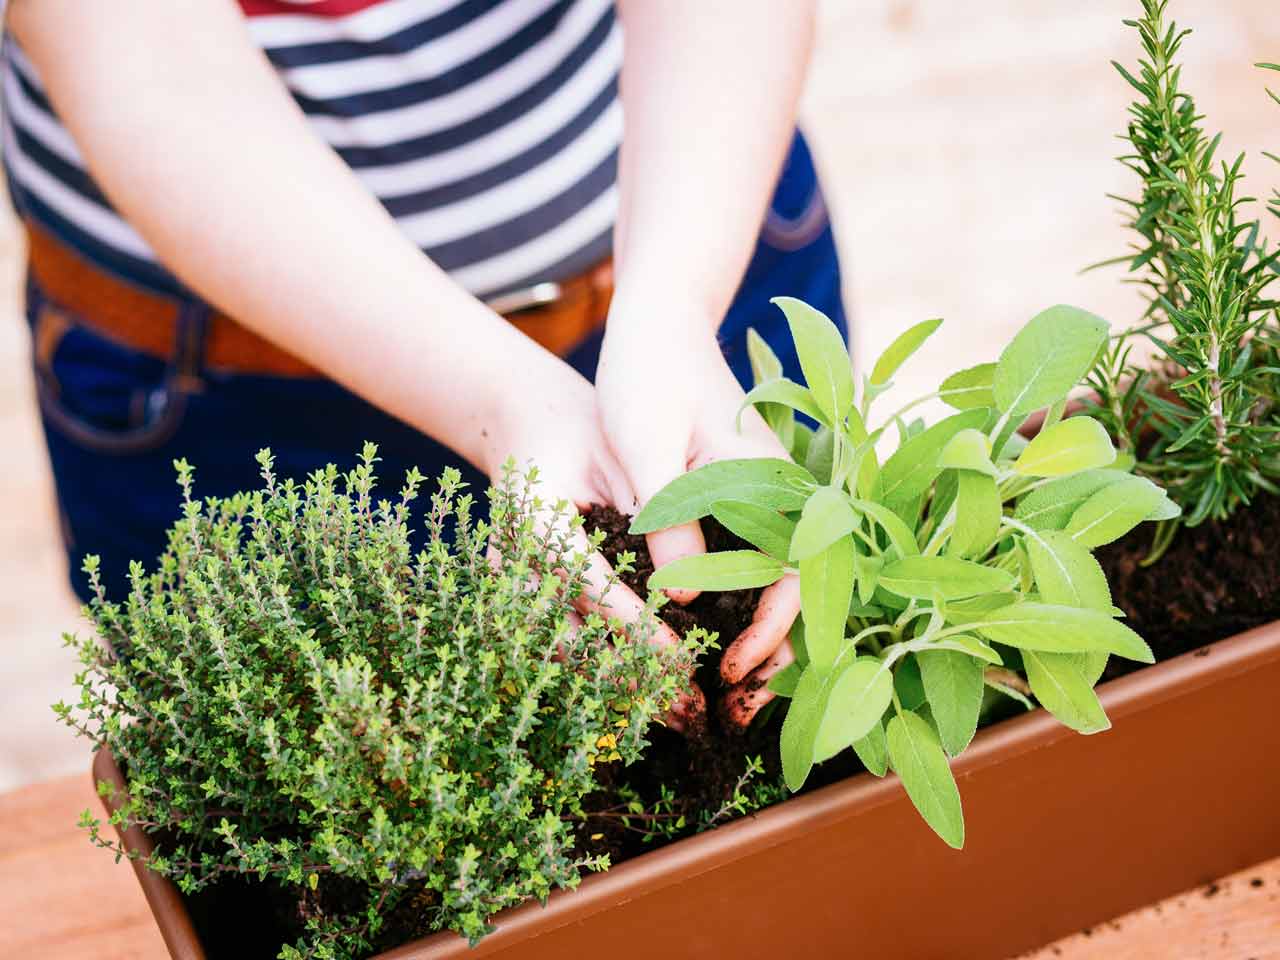 Planting a container with herbs